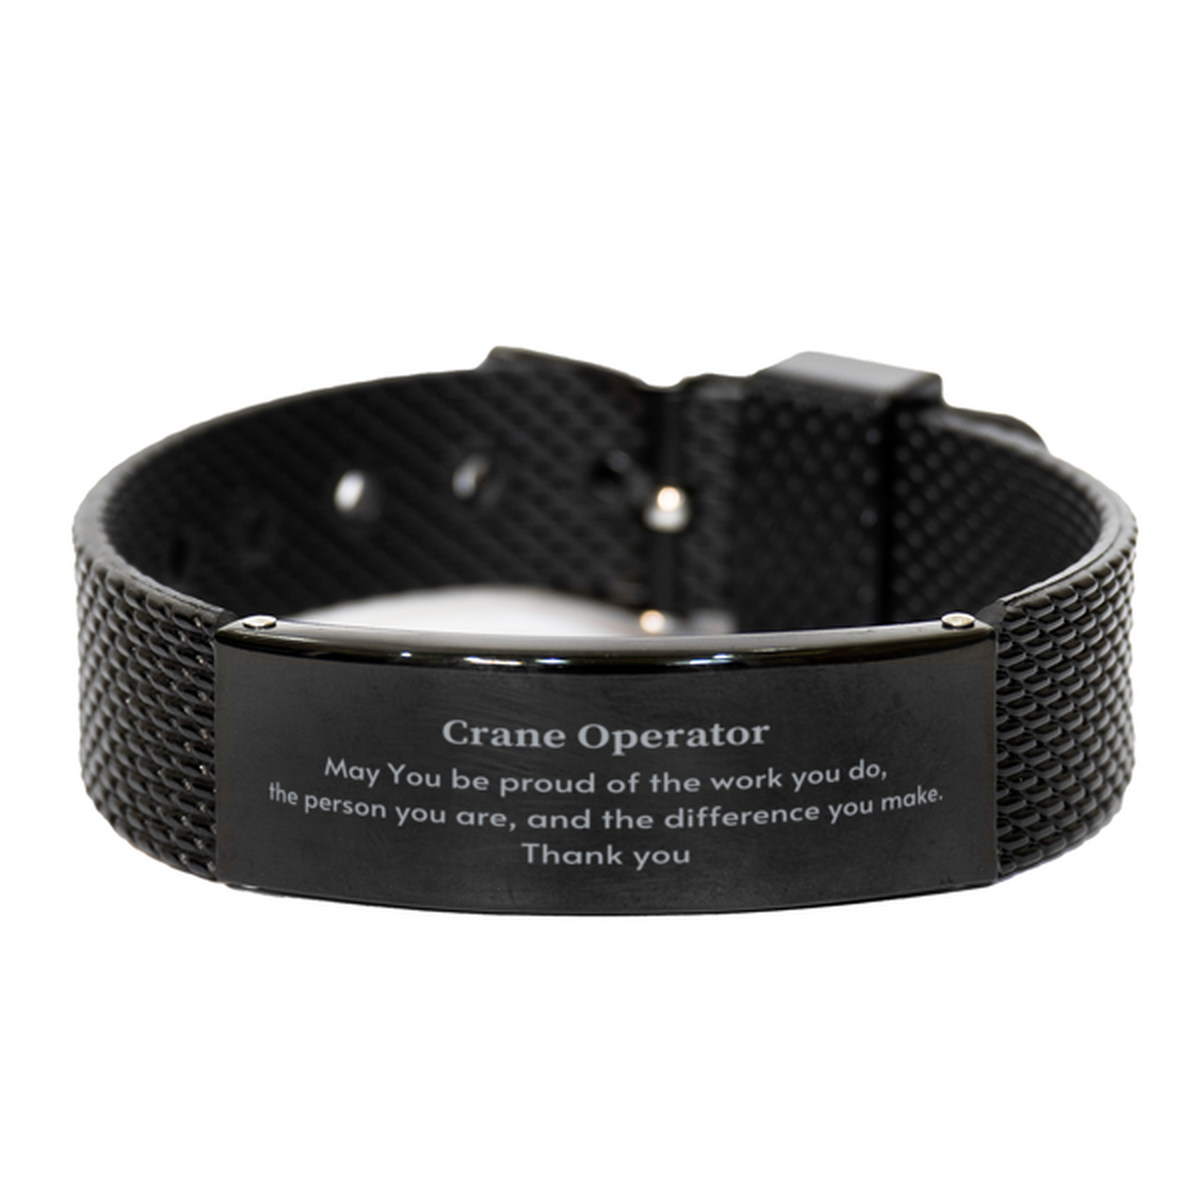 Heartwarming Black Shark Mesh Bracelet Retirement Coworkers Gifts for Crane Operator, Crane Operator May You be proud of the work you do, the person you are Gifts for Boss Men Women Friends